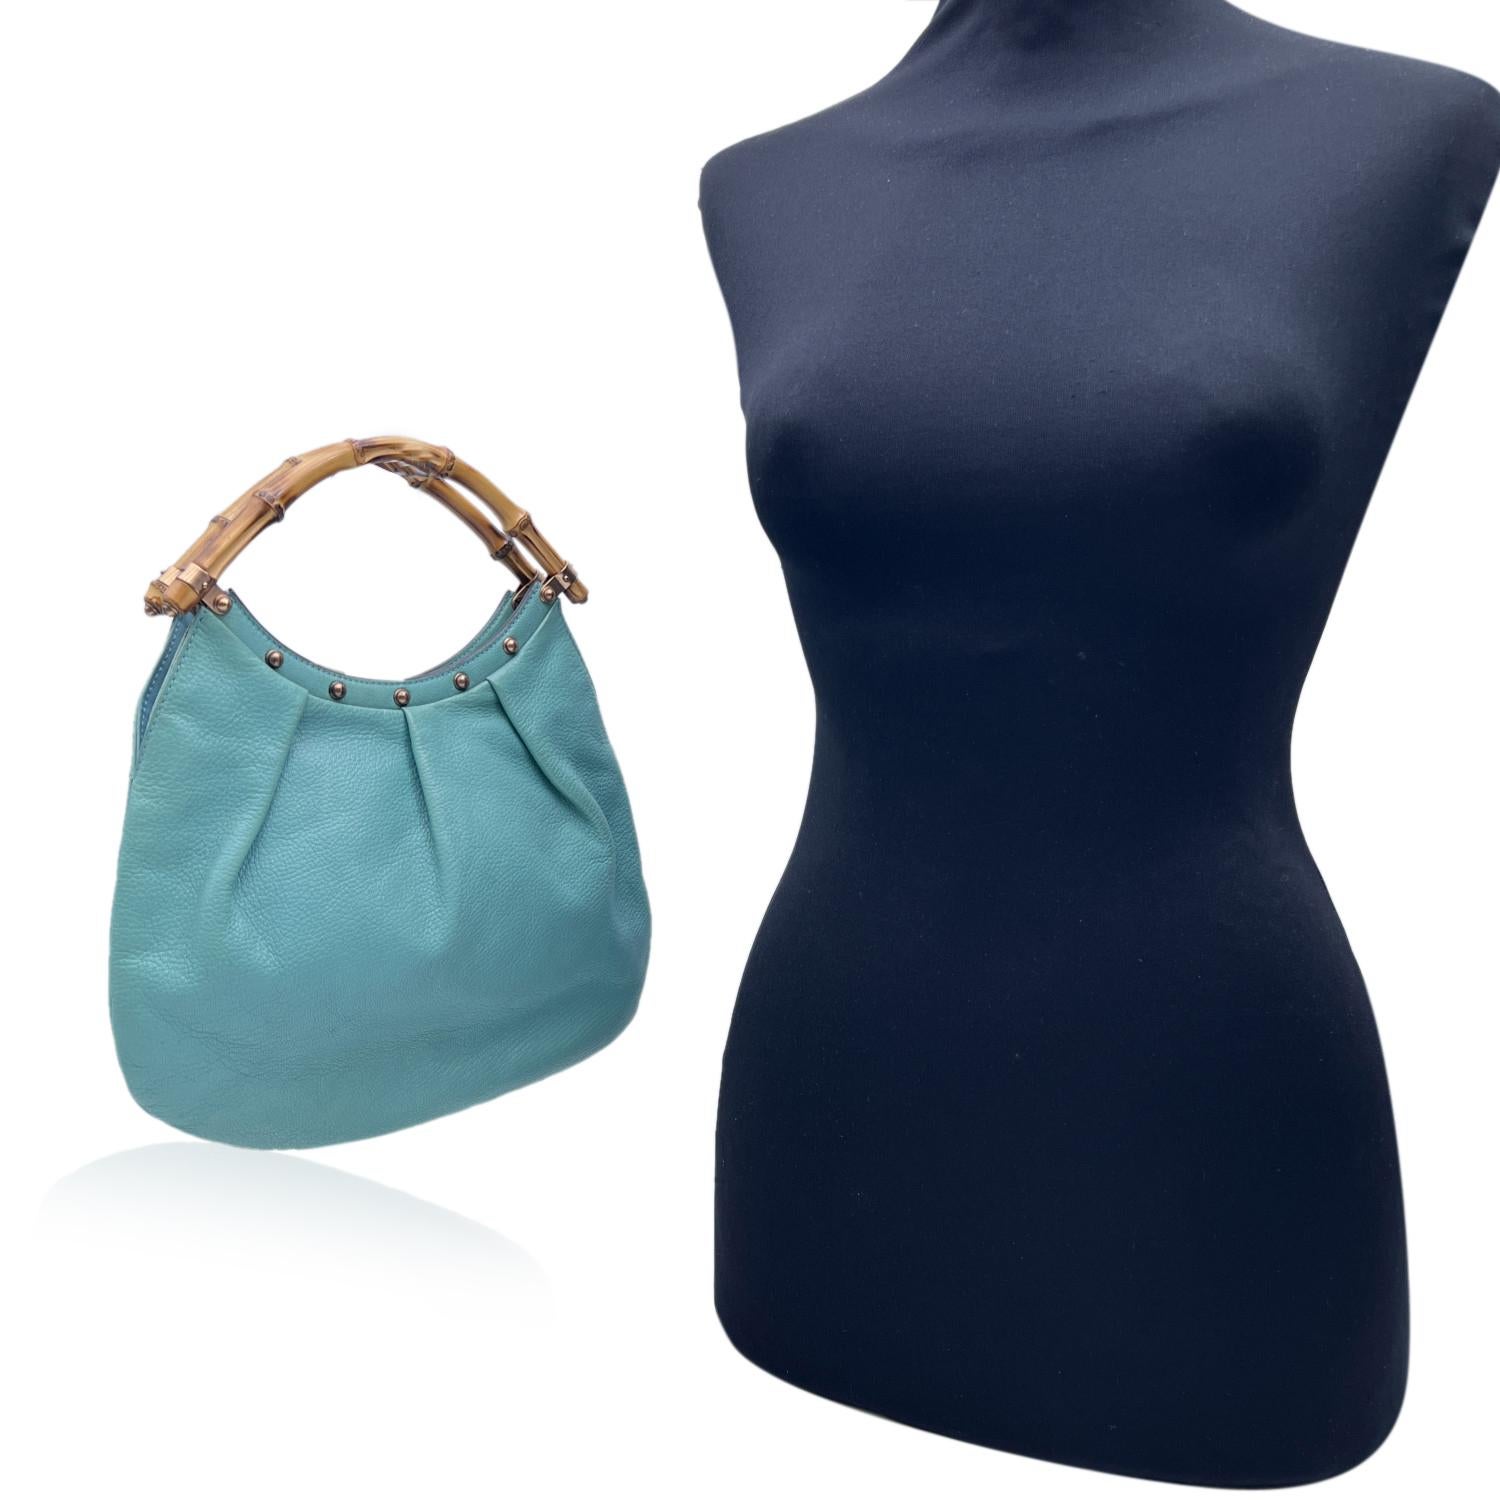 Beautiful small tote handbag by Gucci, crafted in turquoise leather with bamboo handles. It features rose gold tone hardware, studs detailing on top, an open top, turquoise canvas lining and 1 side open pocket inside. 'GUCCI - Made in Italy' tag